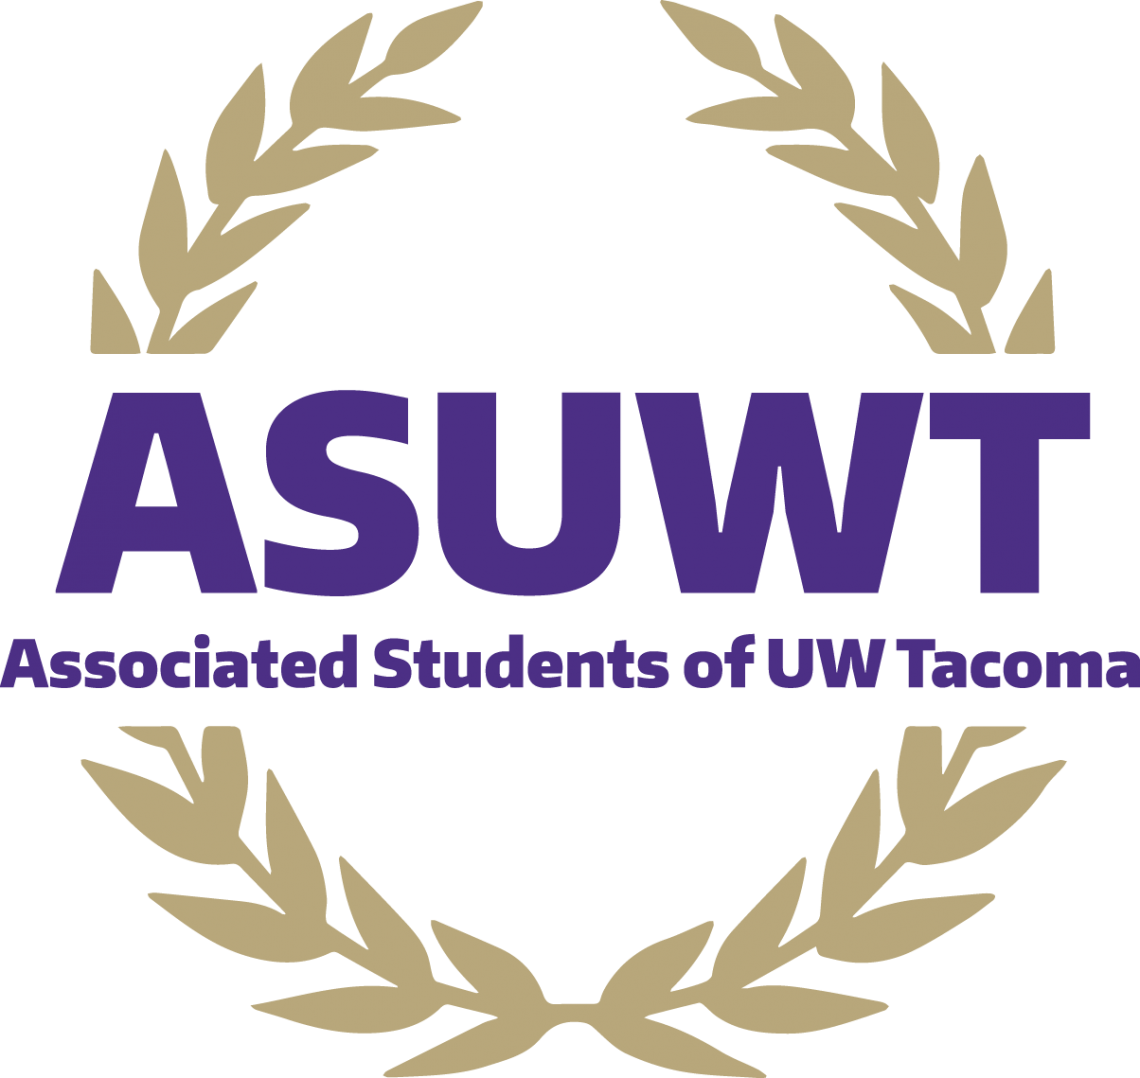 ASUWT logo showing laurel leaves, with ASUWT and Associated Students of UW Tacoma